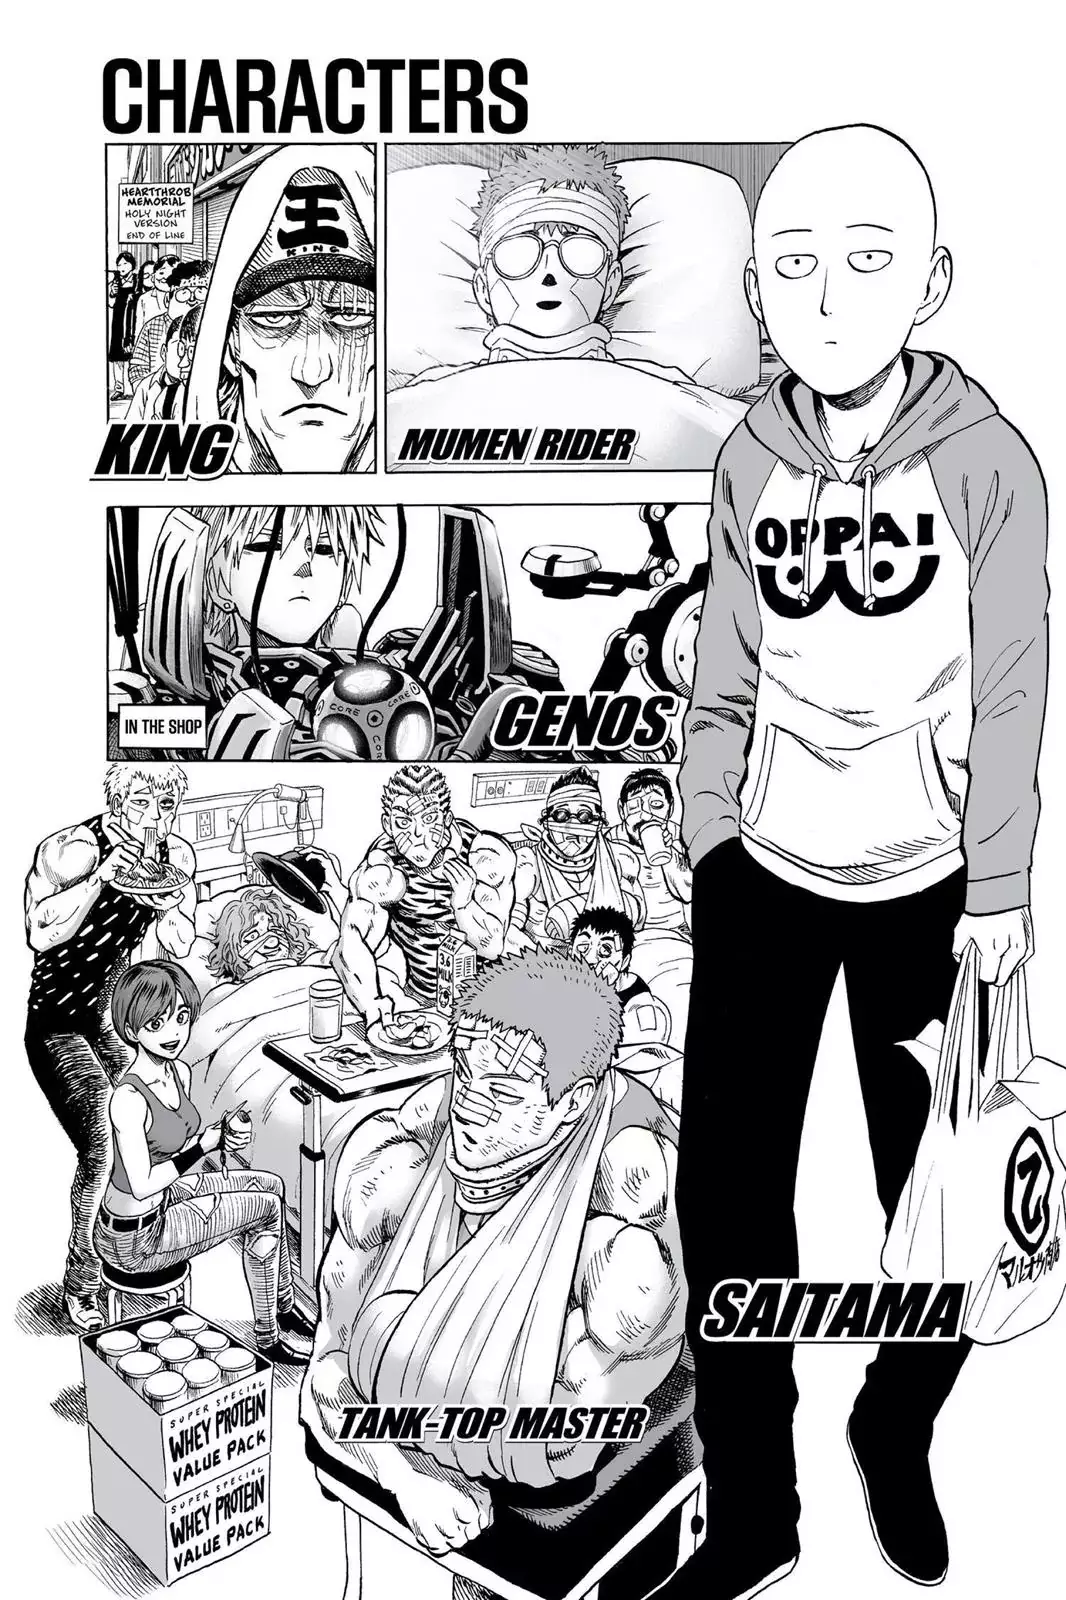 One Punch Man Chapter 48, READ One Punch Man Chapter 48 ONLINE, lost in the cloud genre,lost in the cloud gif,lost in the cloud girl,lost in the cloud goods,lost in the cloud goodreads,lost in the cloud,lost ark cloud gaming,lost odyssey cloud gaming,lost in the cloud fanart,lost in the cloud fanfic,lost in the cloud fandom,lost in the cloud first kiss,lost in the cloud font,lost in the cloud ending,lost in the cloud episode 97,lost in the cloud edit,lost in the cloud explained,lost in the cloud dog,lost in the cloud discord server,lost in the cloud desktop wallpaper,lost in the cloud drawing,can't find my cloud on network,lost in the cloud characters,lost in the cloud chapter 93 release date,lost in the cloud birthday,lost in the cloud birthday art,lost in the cloud background,lost in the cloud banner,lost in the clouds meaning,what is the black cloud in lost,lost in the cloud ao3,lost in the cloud anime,lost in the cloud art,lost in the cloud author twitter,lost in the cloud author instagram,lost in the cloud artist,lost in the cloud acrylic stand,lost in the cloud artist twitter,lost in the cloud art style,lost in the cloud analysis